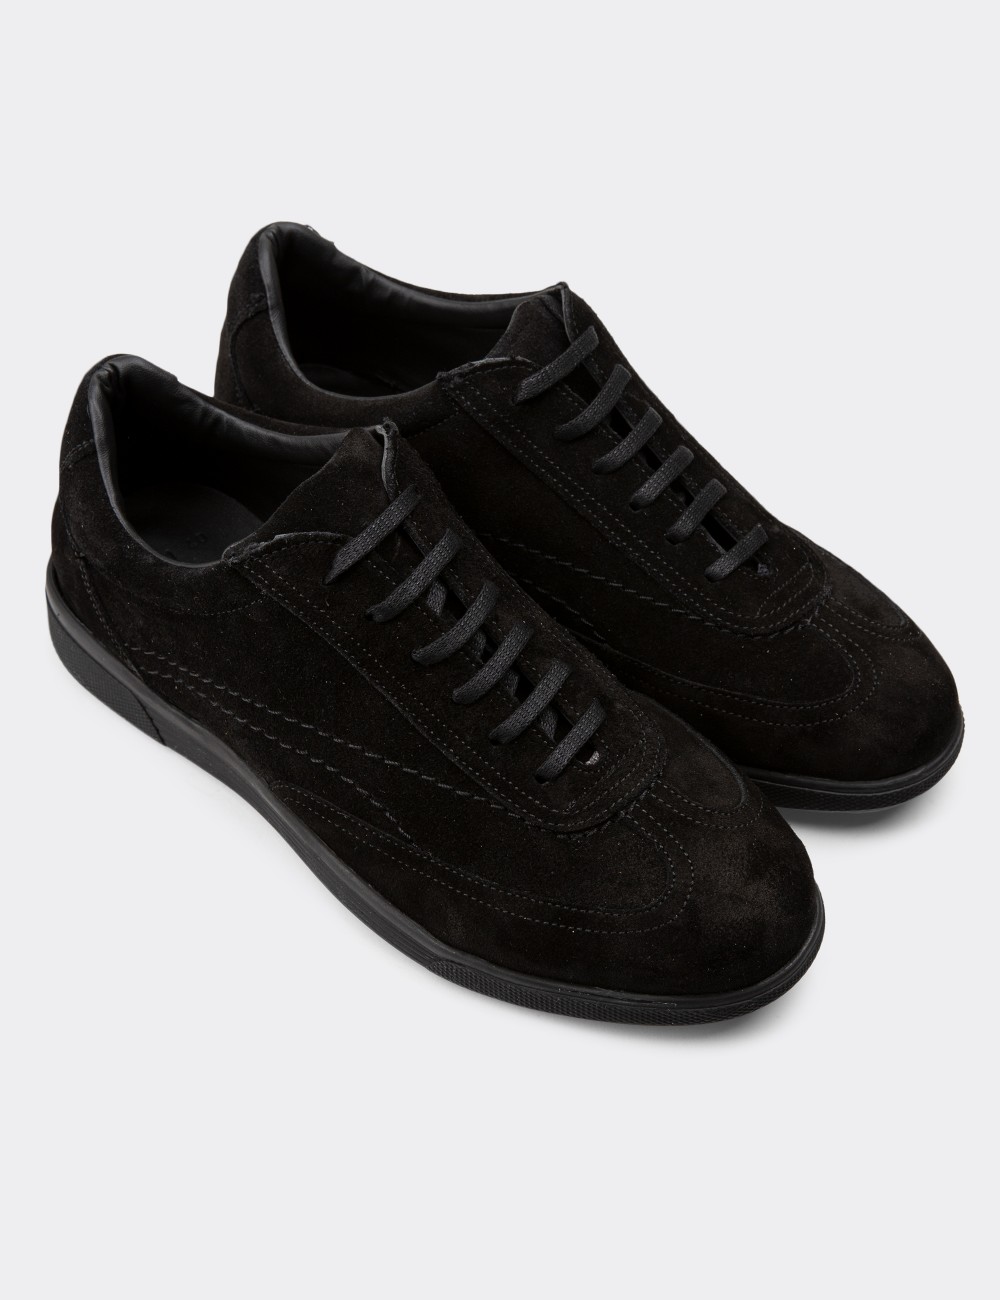 Black Suede Leather Lace-up Shoes - 00321MSYHC08